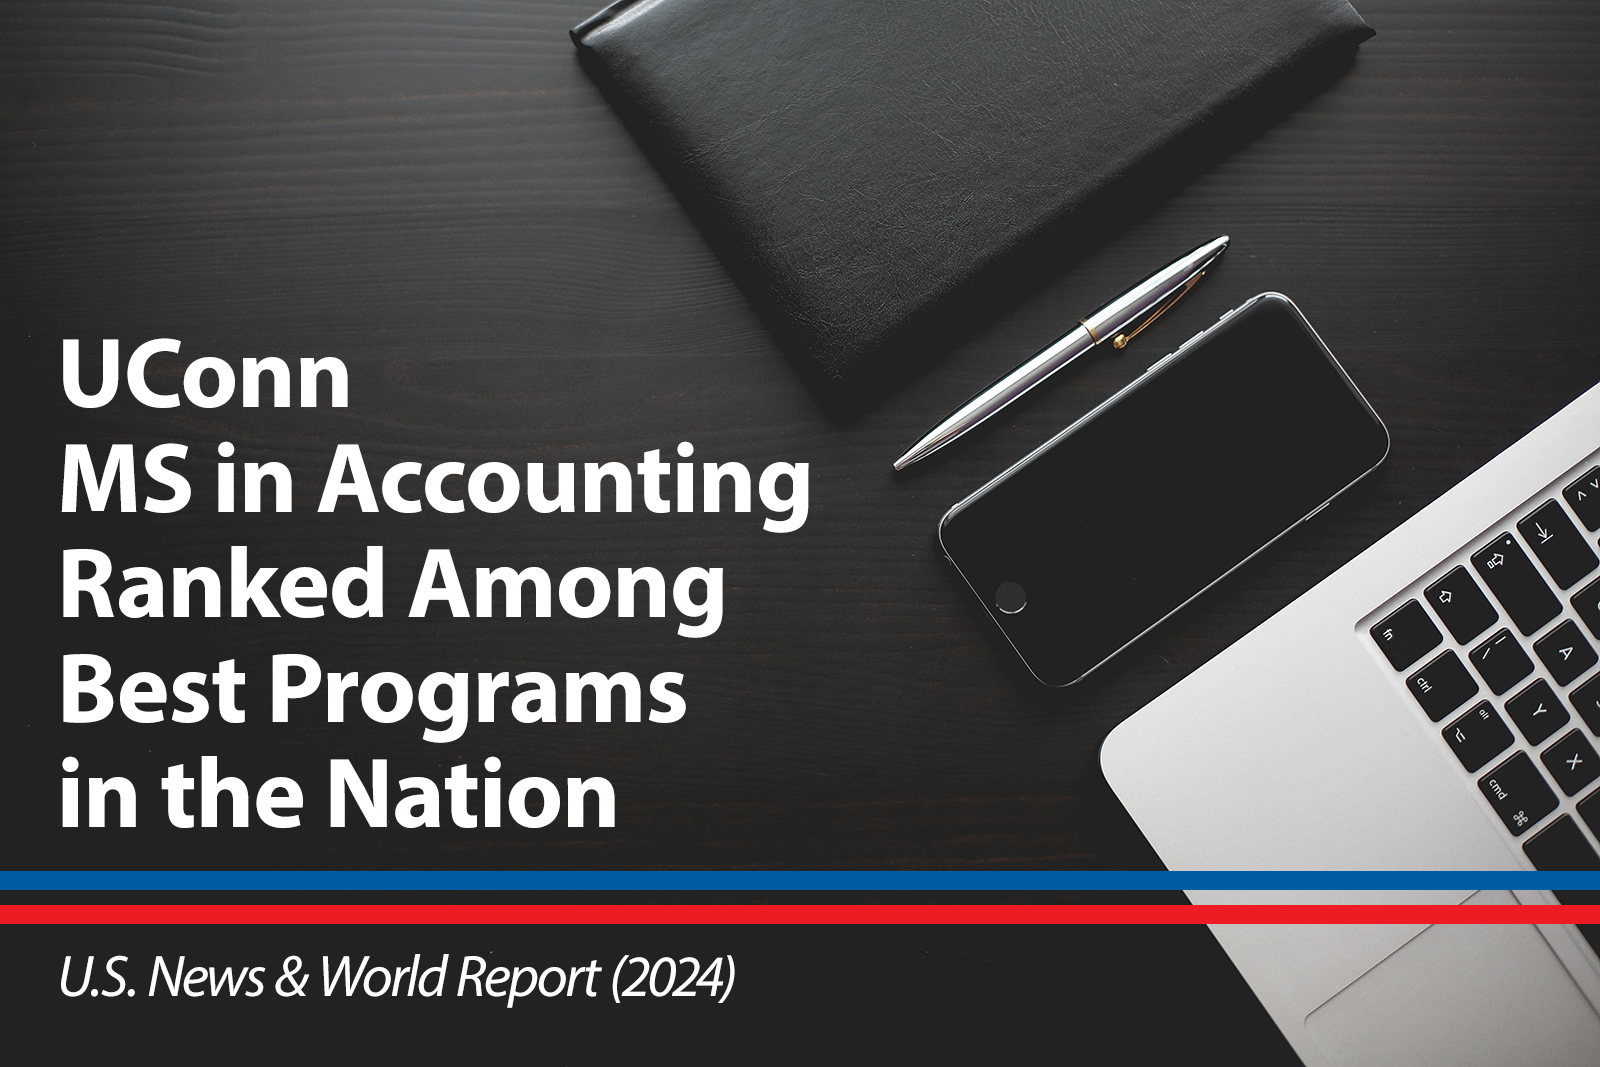 UConn Master of Science in Accounting ranked among the best programs in the nation by U.S. News and World Report 2024